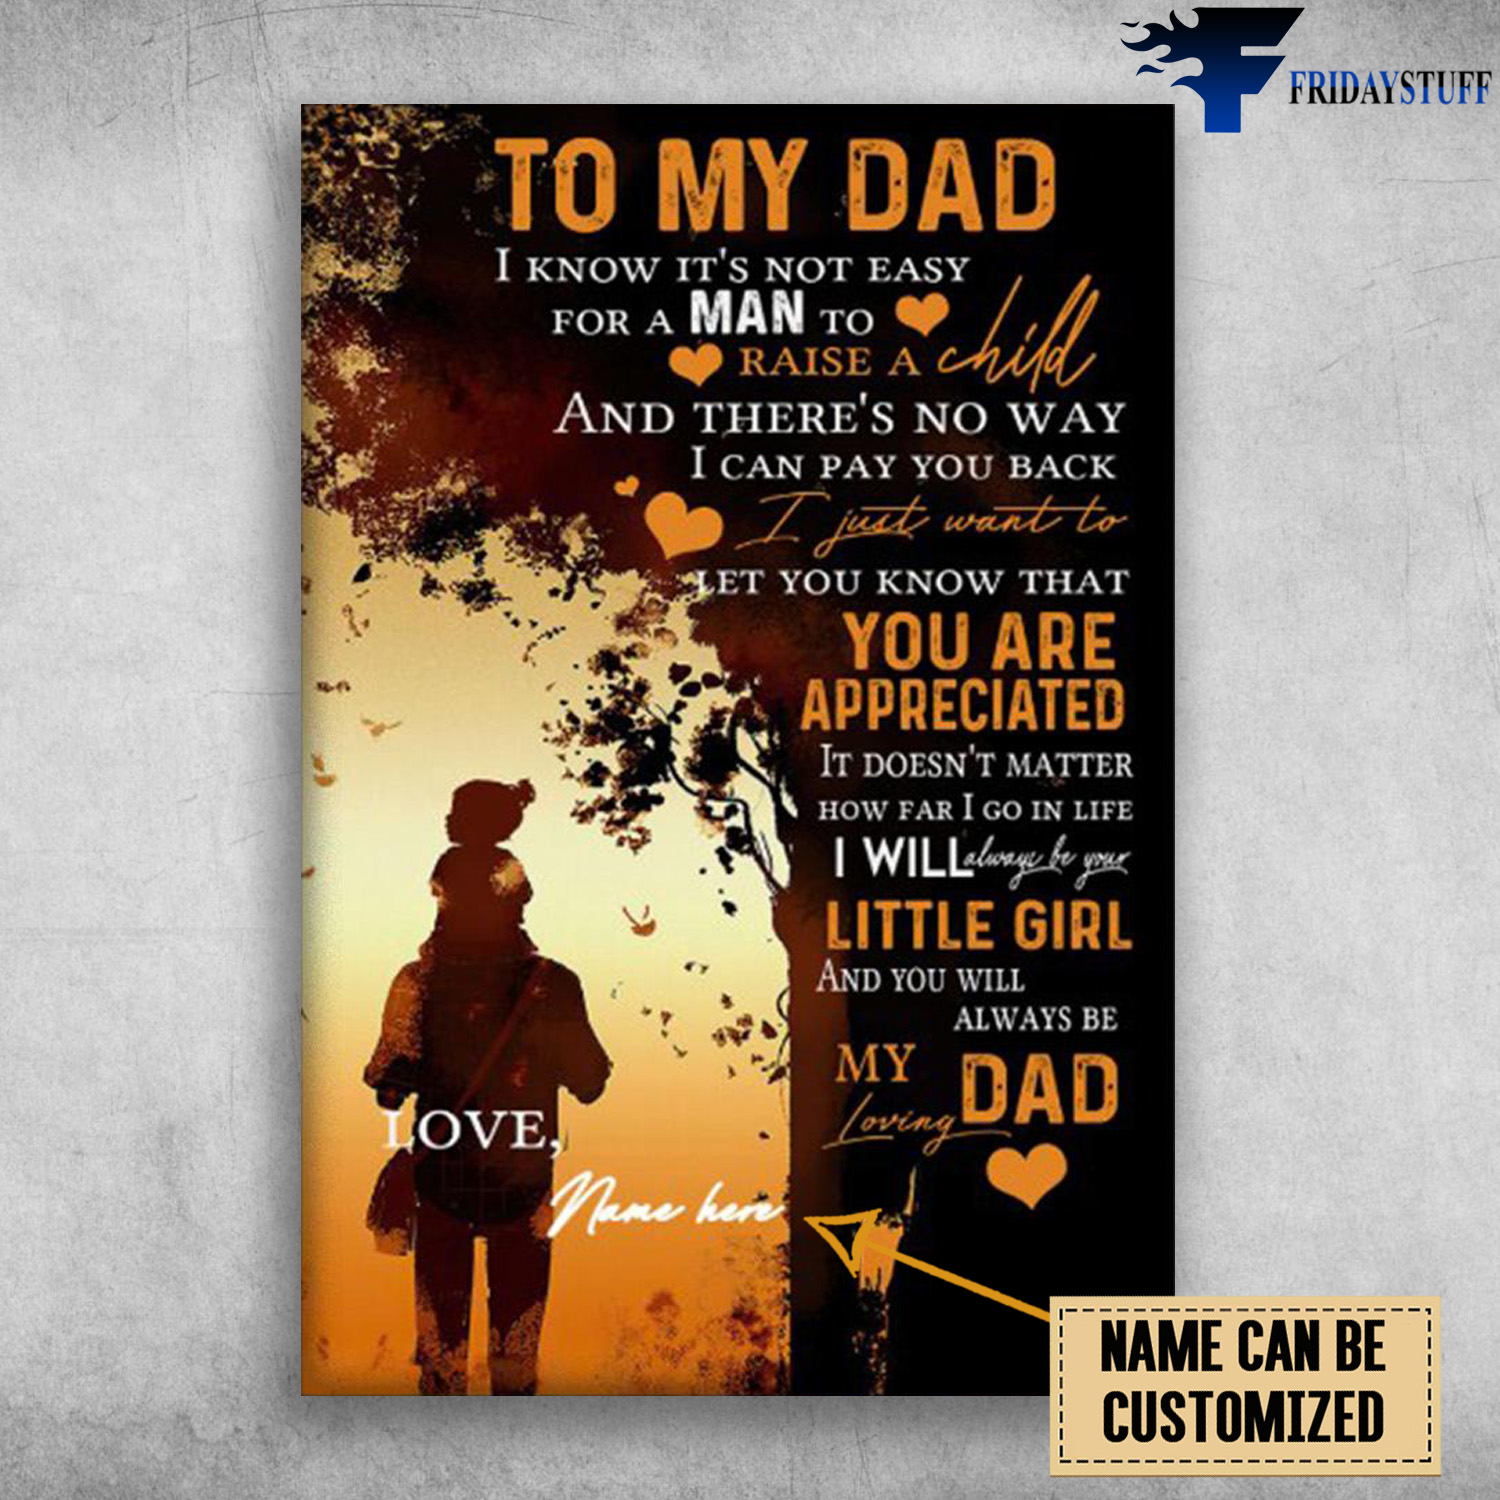 Dad And Daughter, To My Dad, I Know It's Not Easy For A Man, To Raise A Child, And There's No Way, I Can Pay You Back, I Just Want To Let You Know That, You Are Appreciated, Love Dad